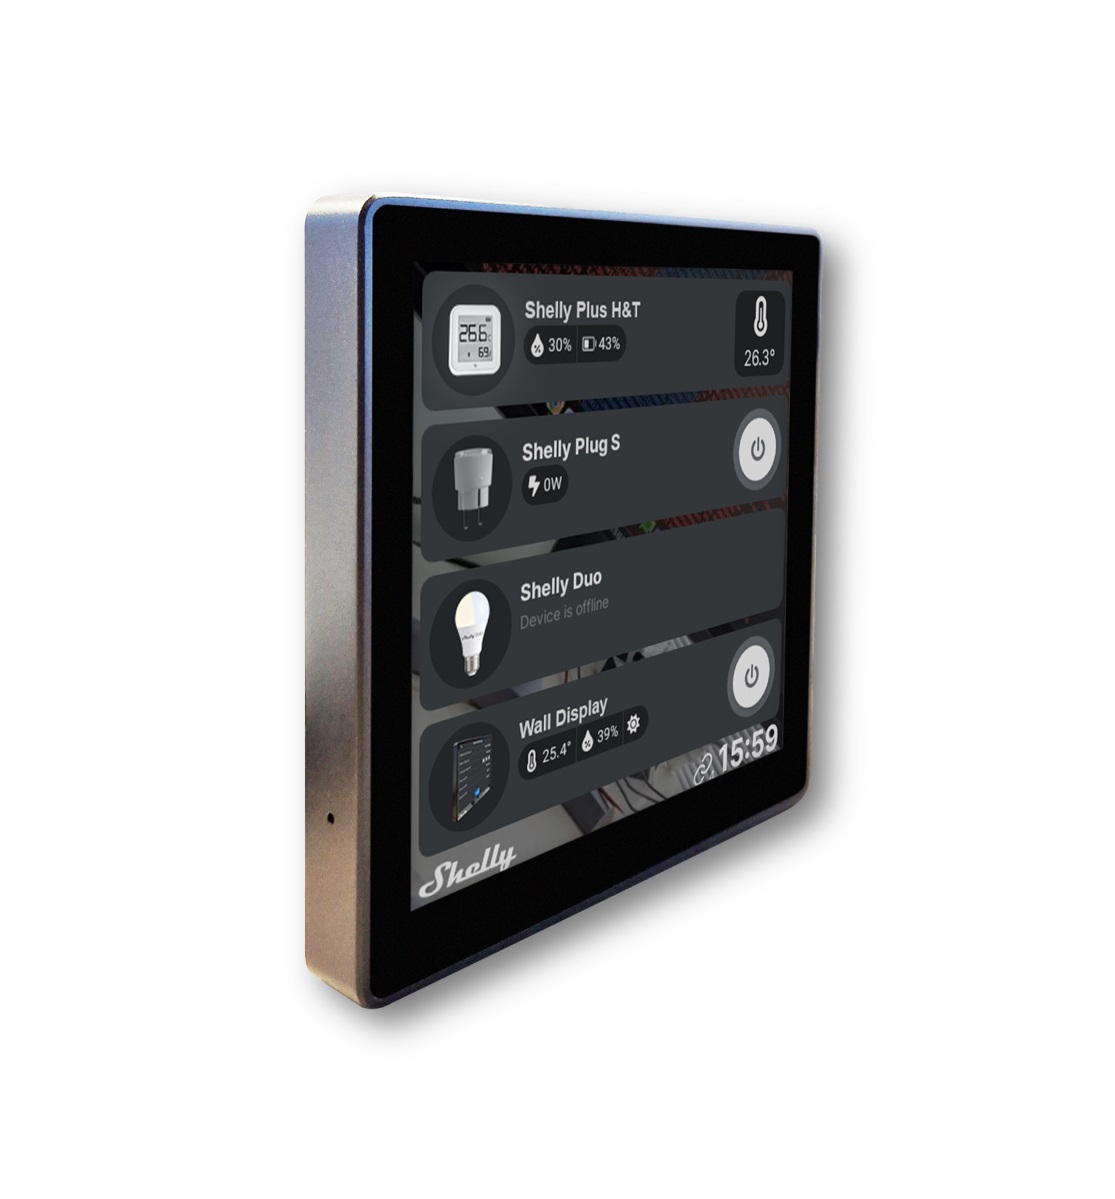 Shelly Wall Display WLAN Wand - Touchdisplay mit Android, Farbe: schwarz